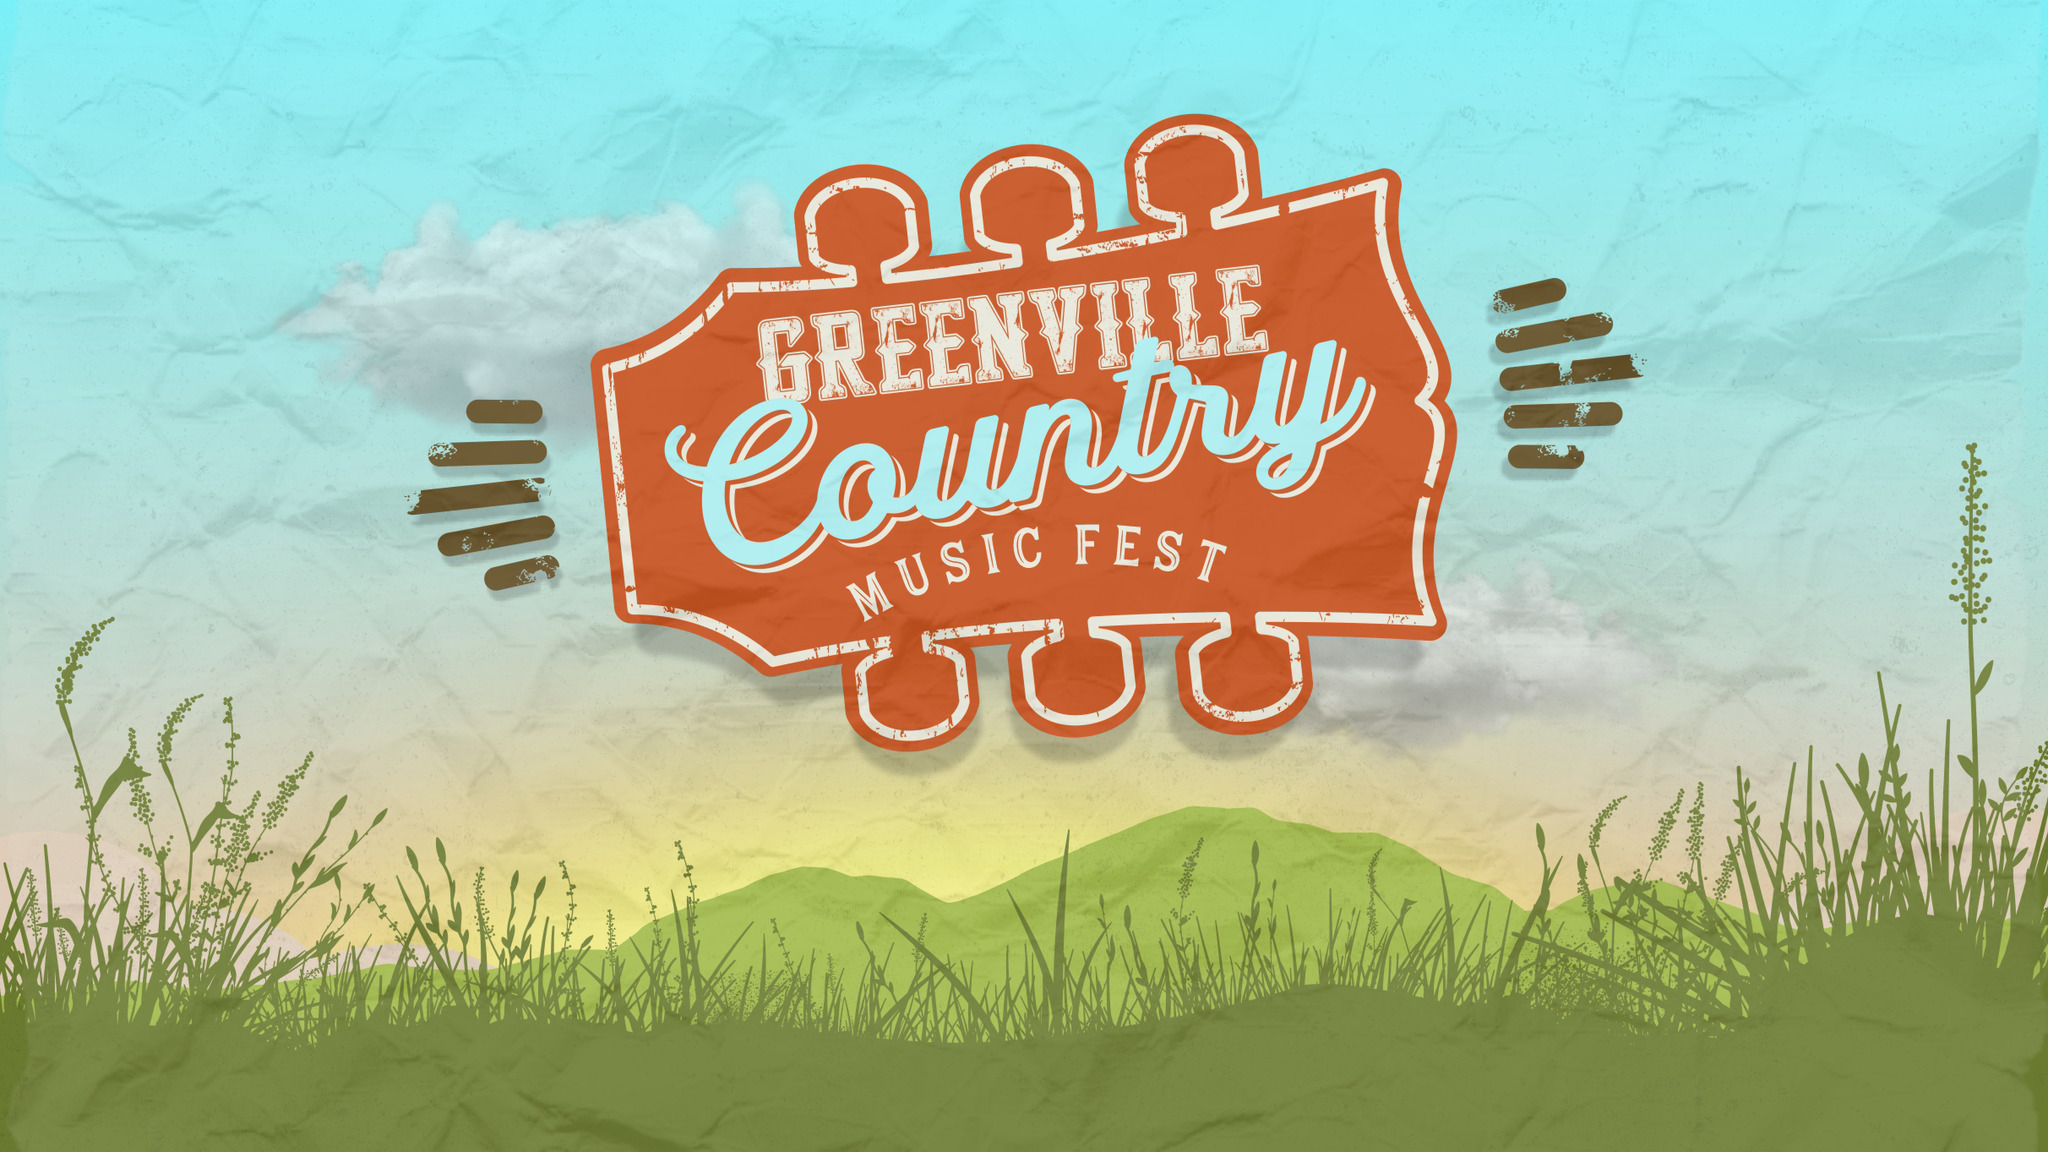 Greenville Country Music Fest Tickets, 20222023 Concert Tour Dates